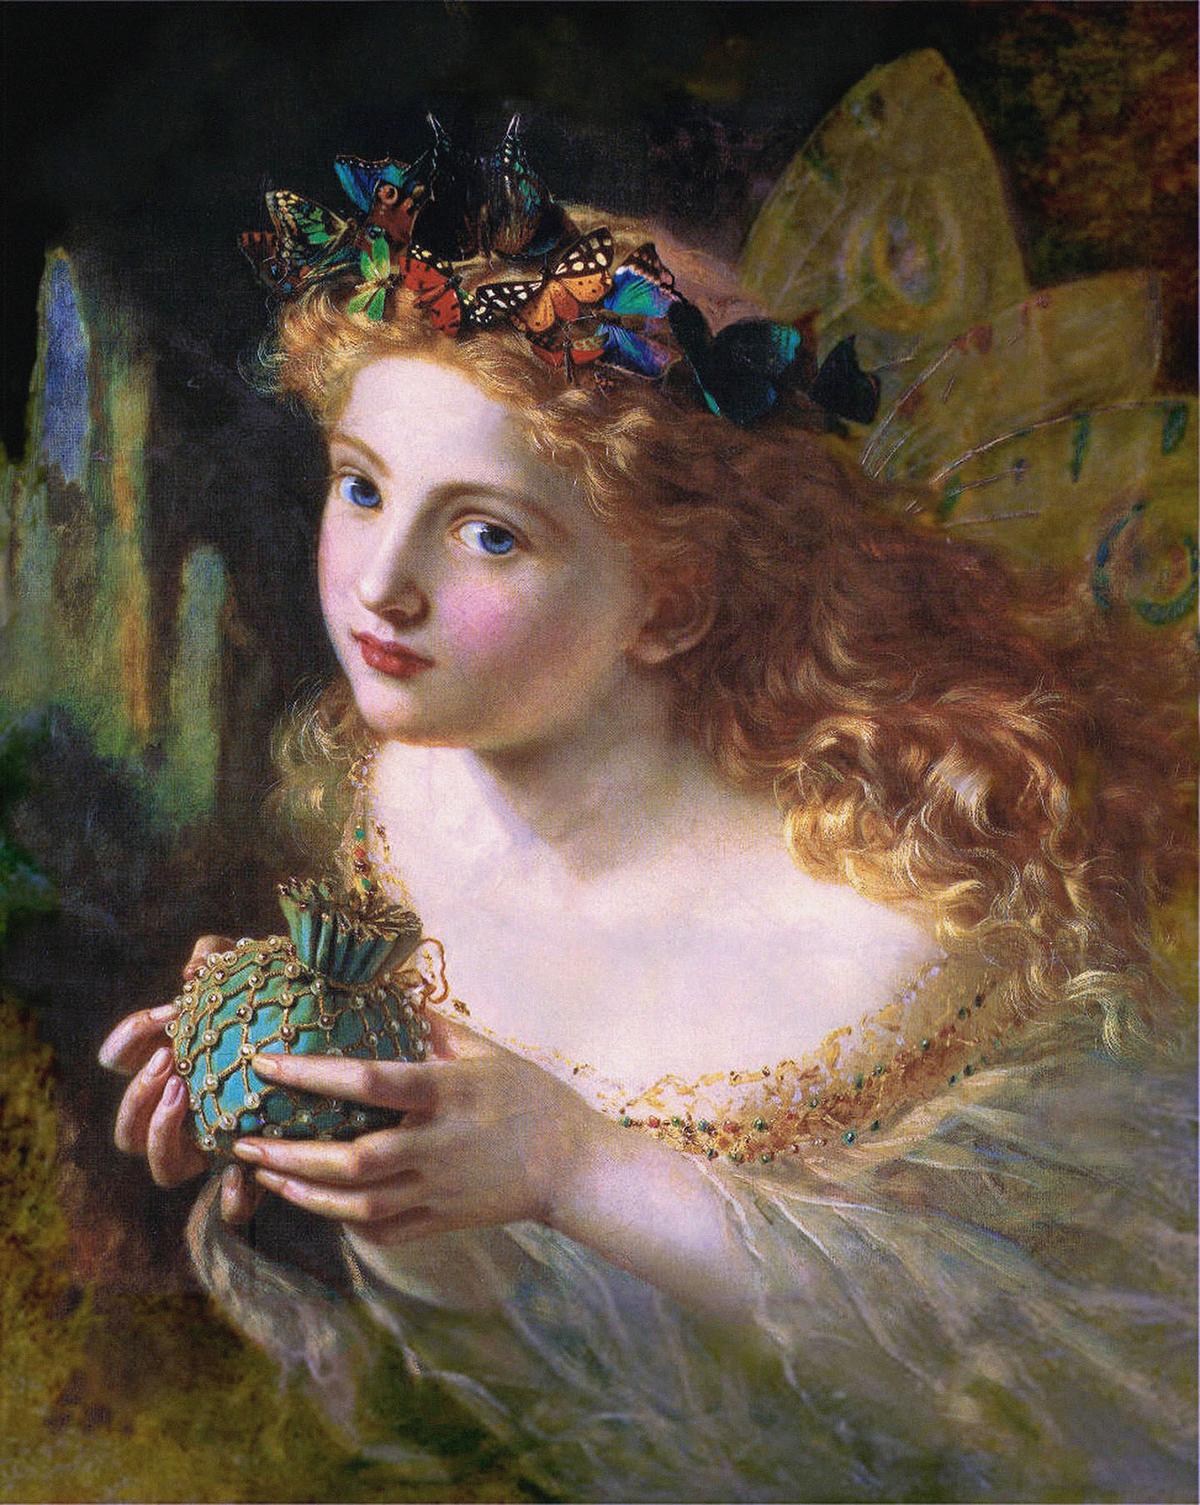 "Take the Fair Face of Woman, and Gently Suspending, With Butterflies, Flowers, and Jewels Attending, Thus Your Fairy is Made of Most Beautiful Things," 19th century, by Sophie Gengembre Anderson. Oil on canvas. Private collection. (Public Domain)